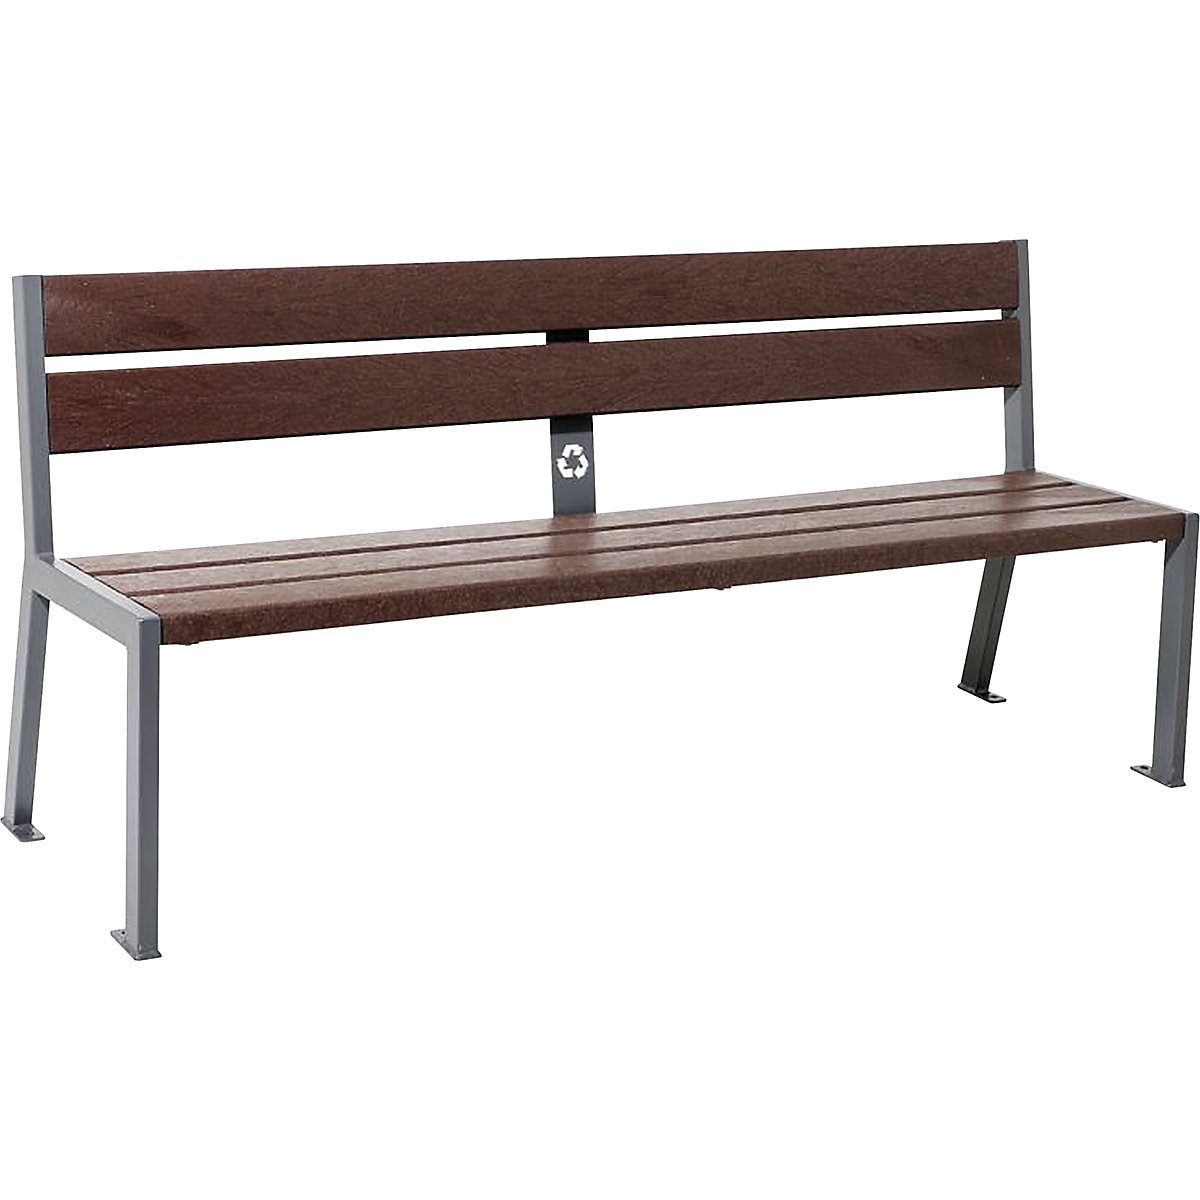 SILAOS® bench made of recycled plastic – PROCITY